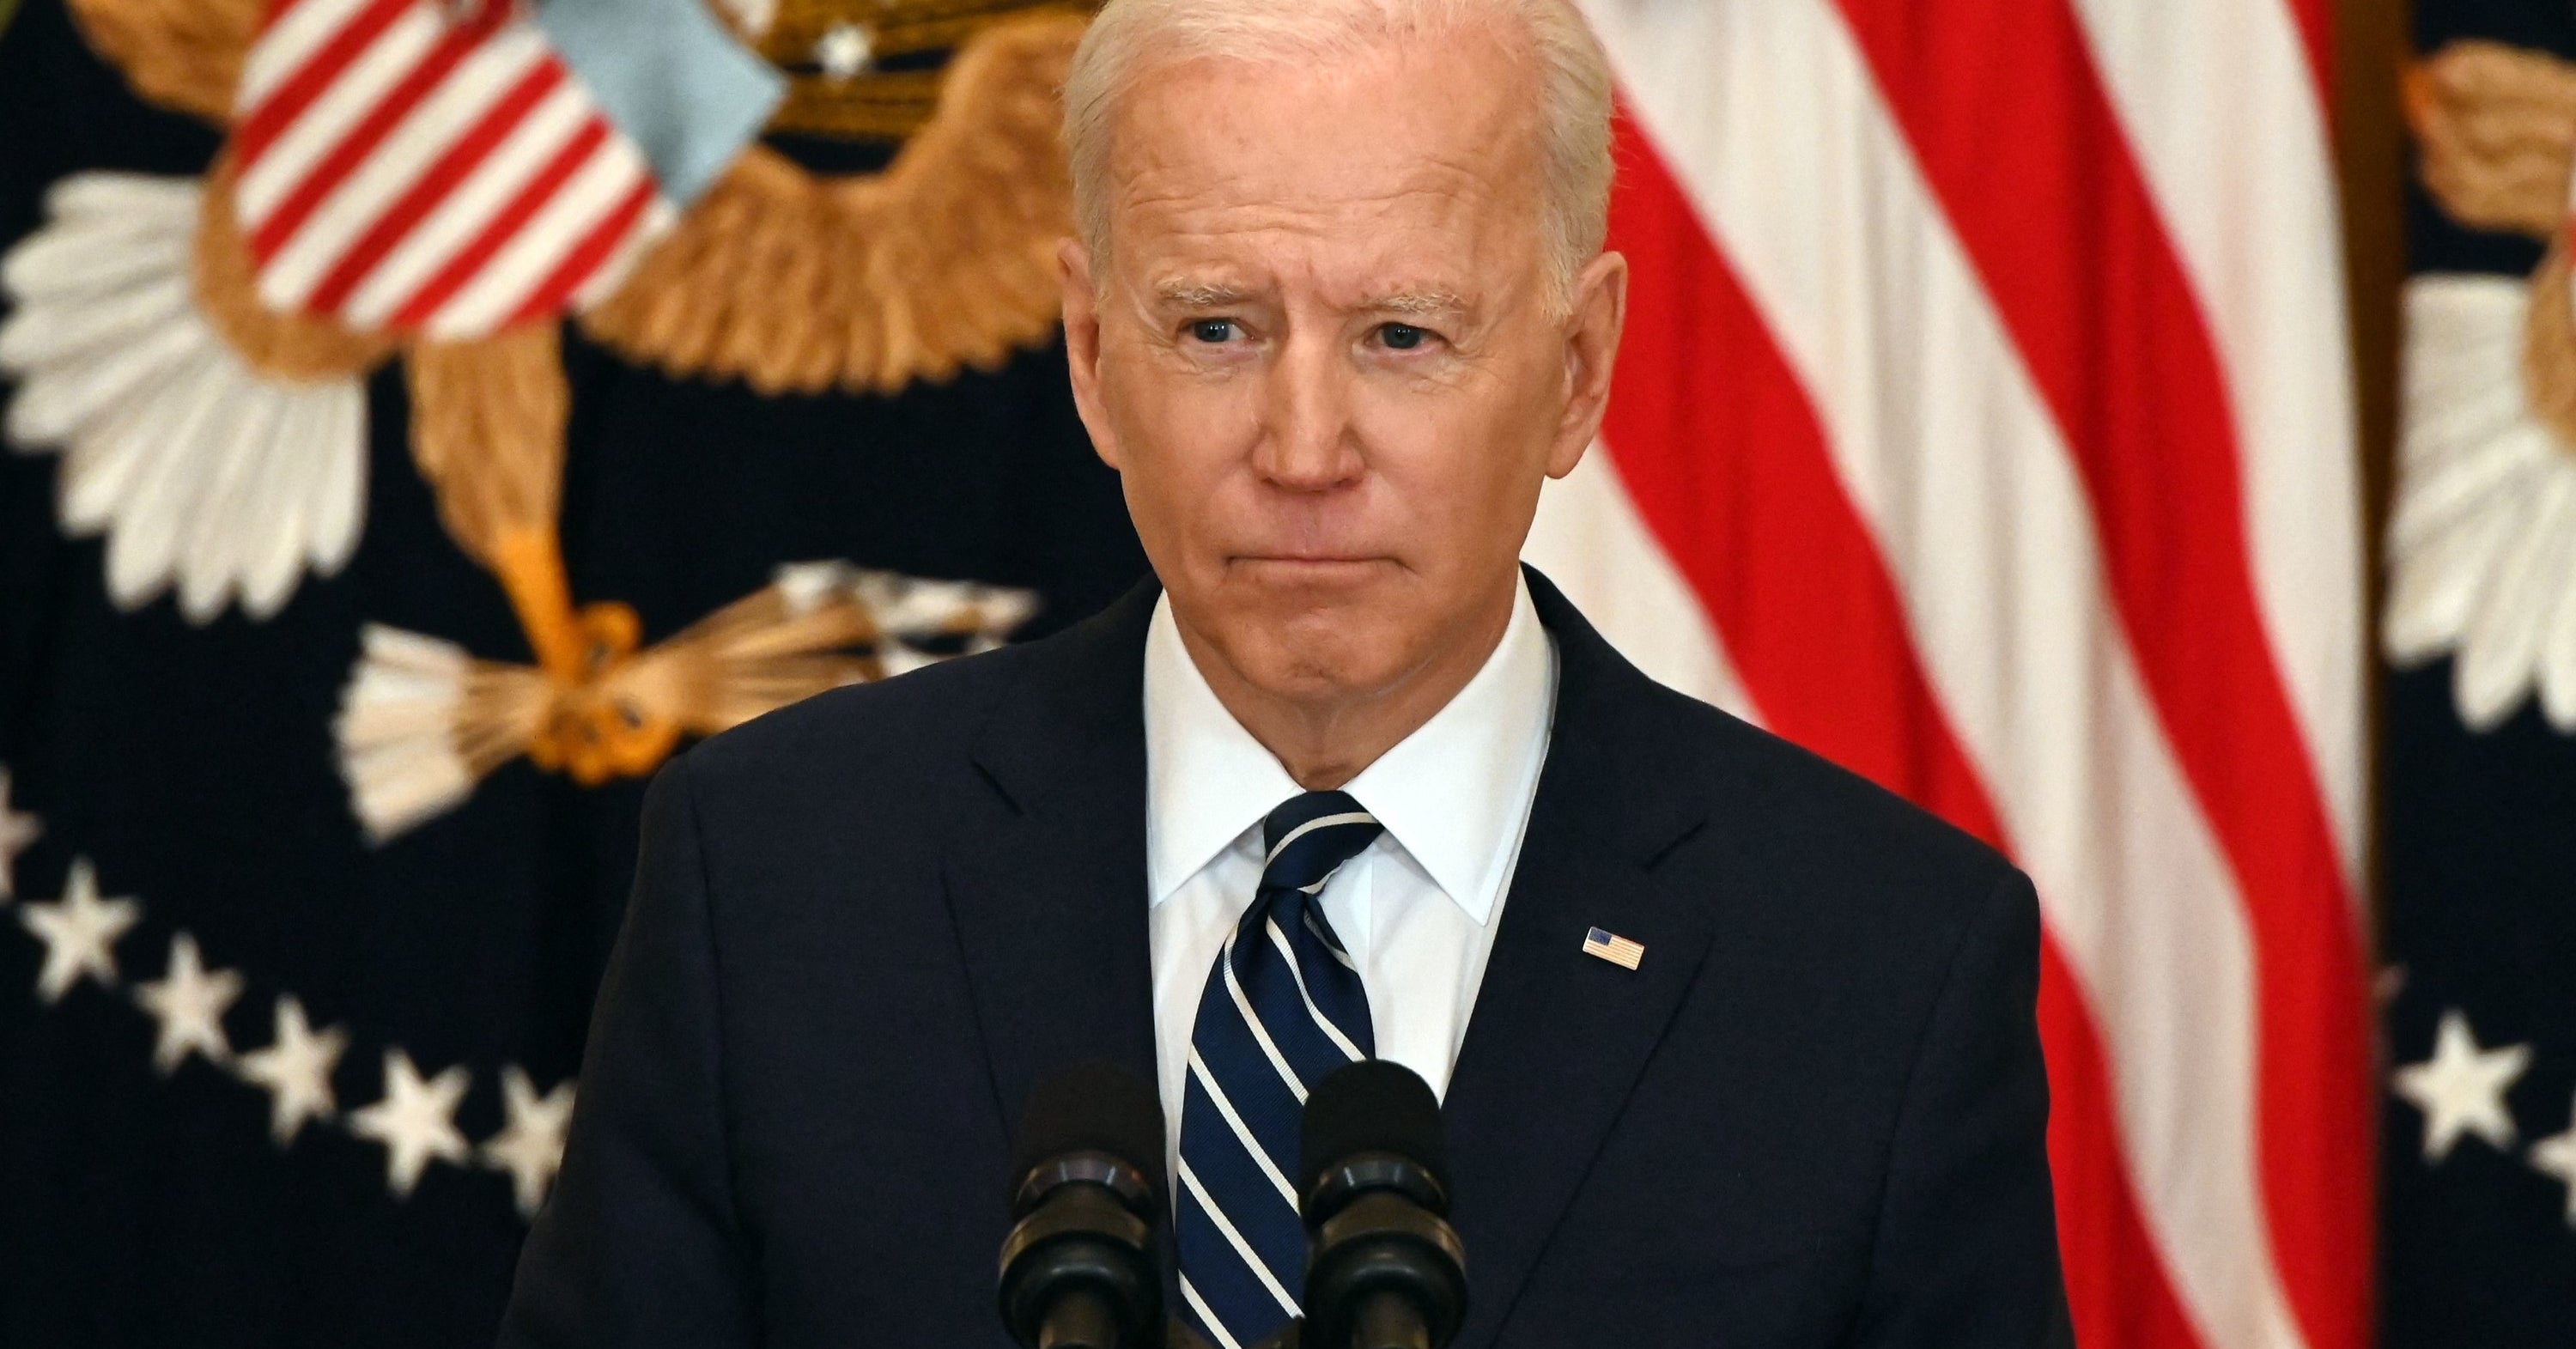 At the first press conference, Biden hit the obstruction